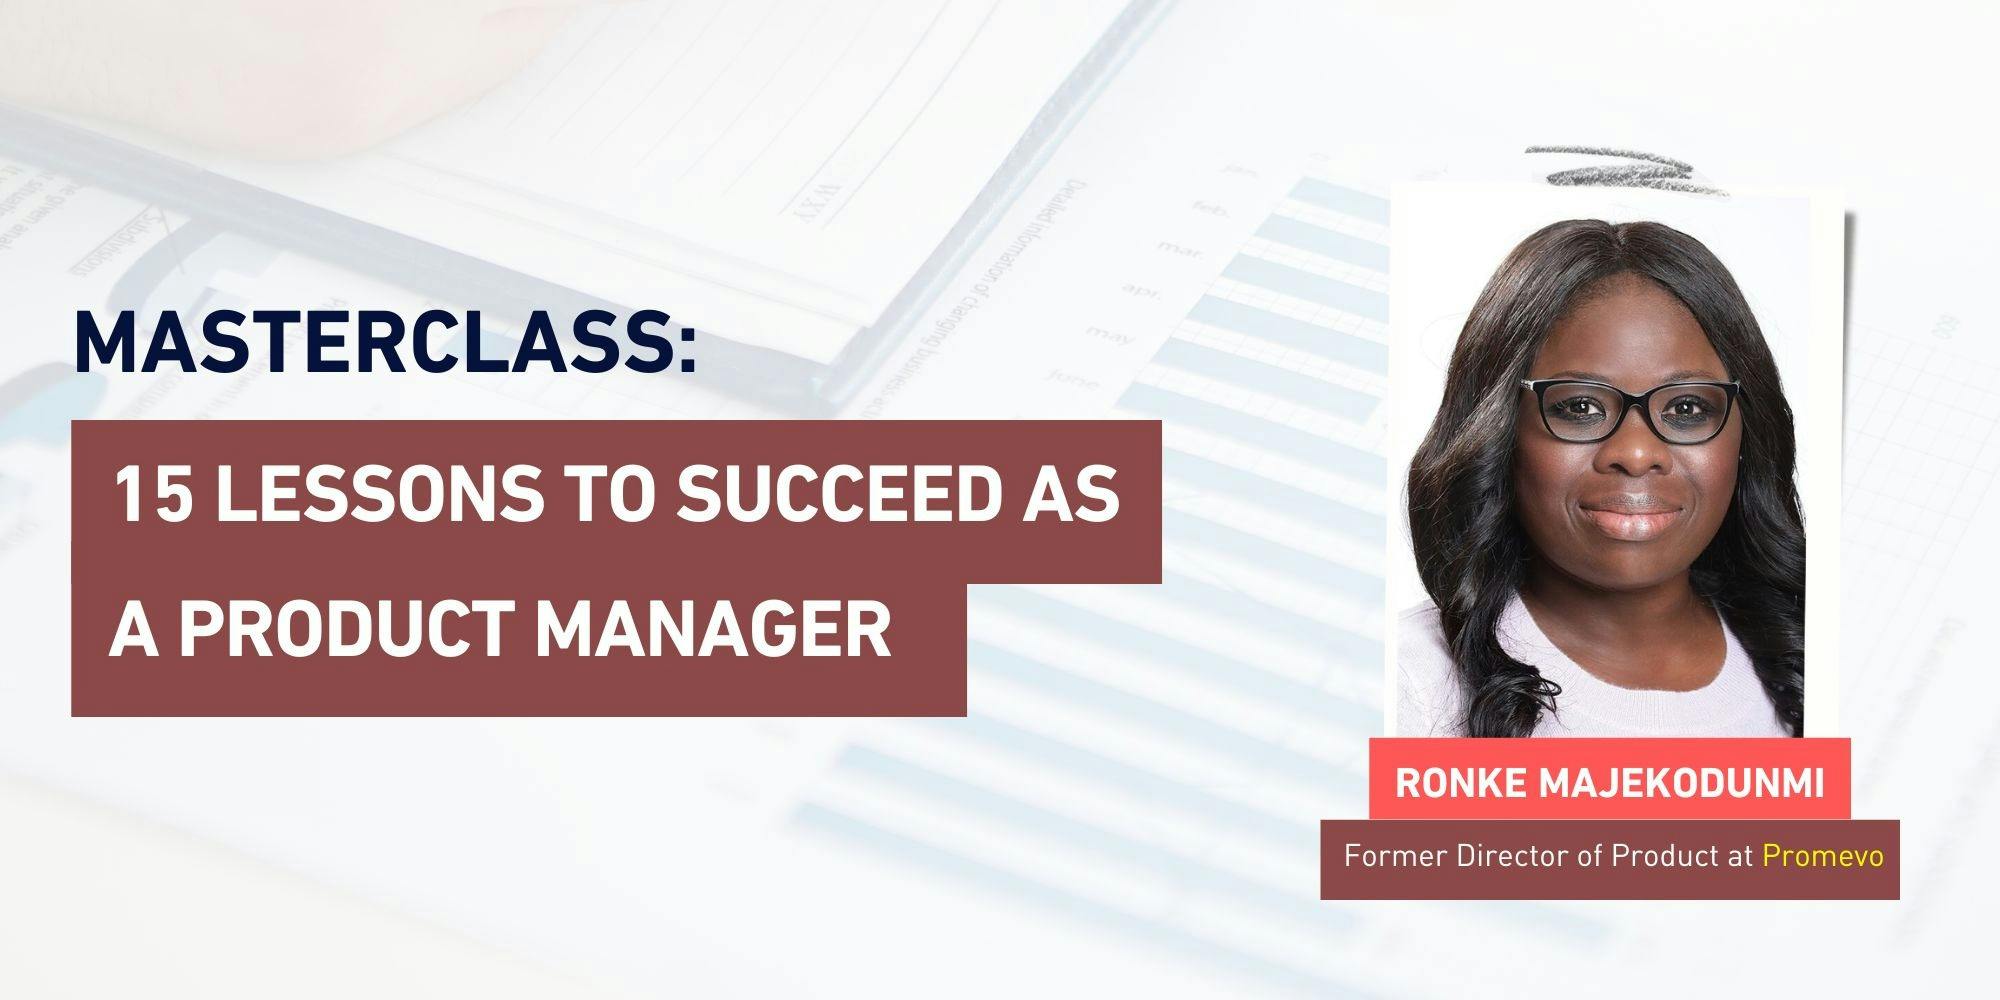 Masterclass: 15 Lessons to Succeed as a Product Manager